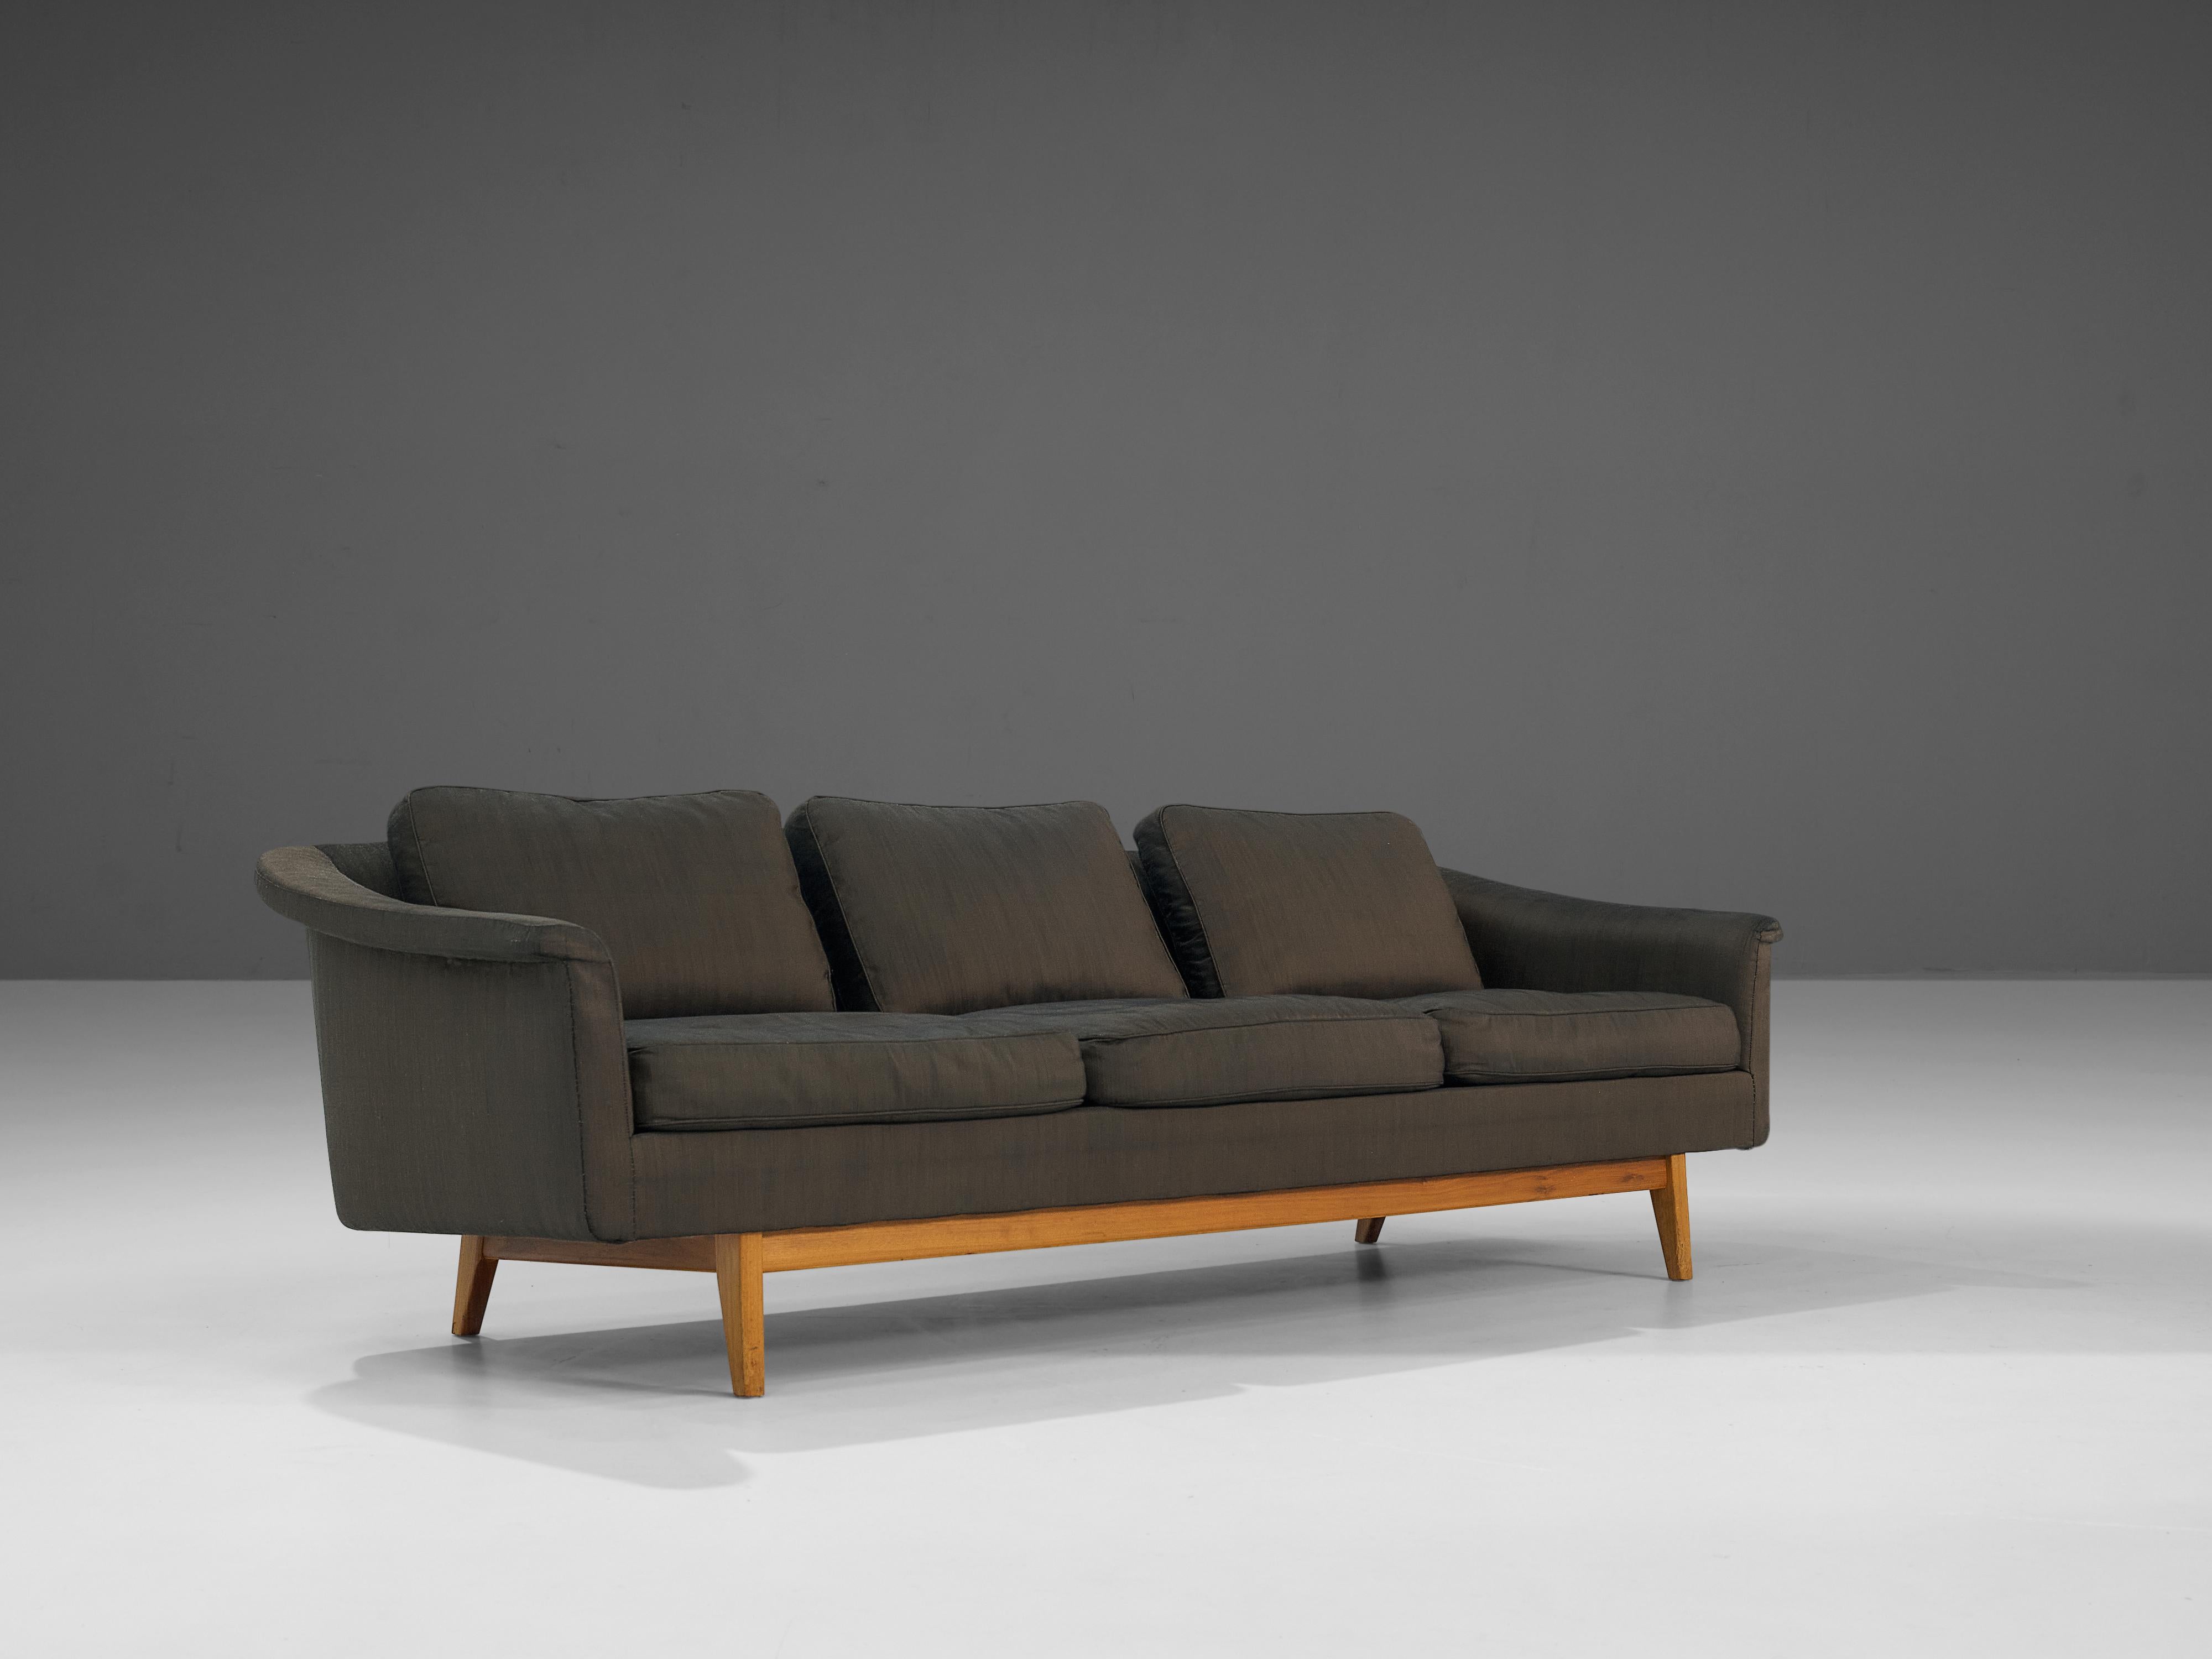 Folke Ohlsson for Dux, sofa model ‘Passadena’, walnut, fabric, Denmark, 1960s

This sofa is characterized by a splendid design that epitomizes a simplistic, natural and timeless aesthetics. The whole unit is well-designed showing a solid